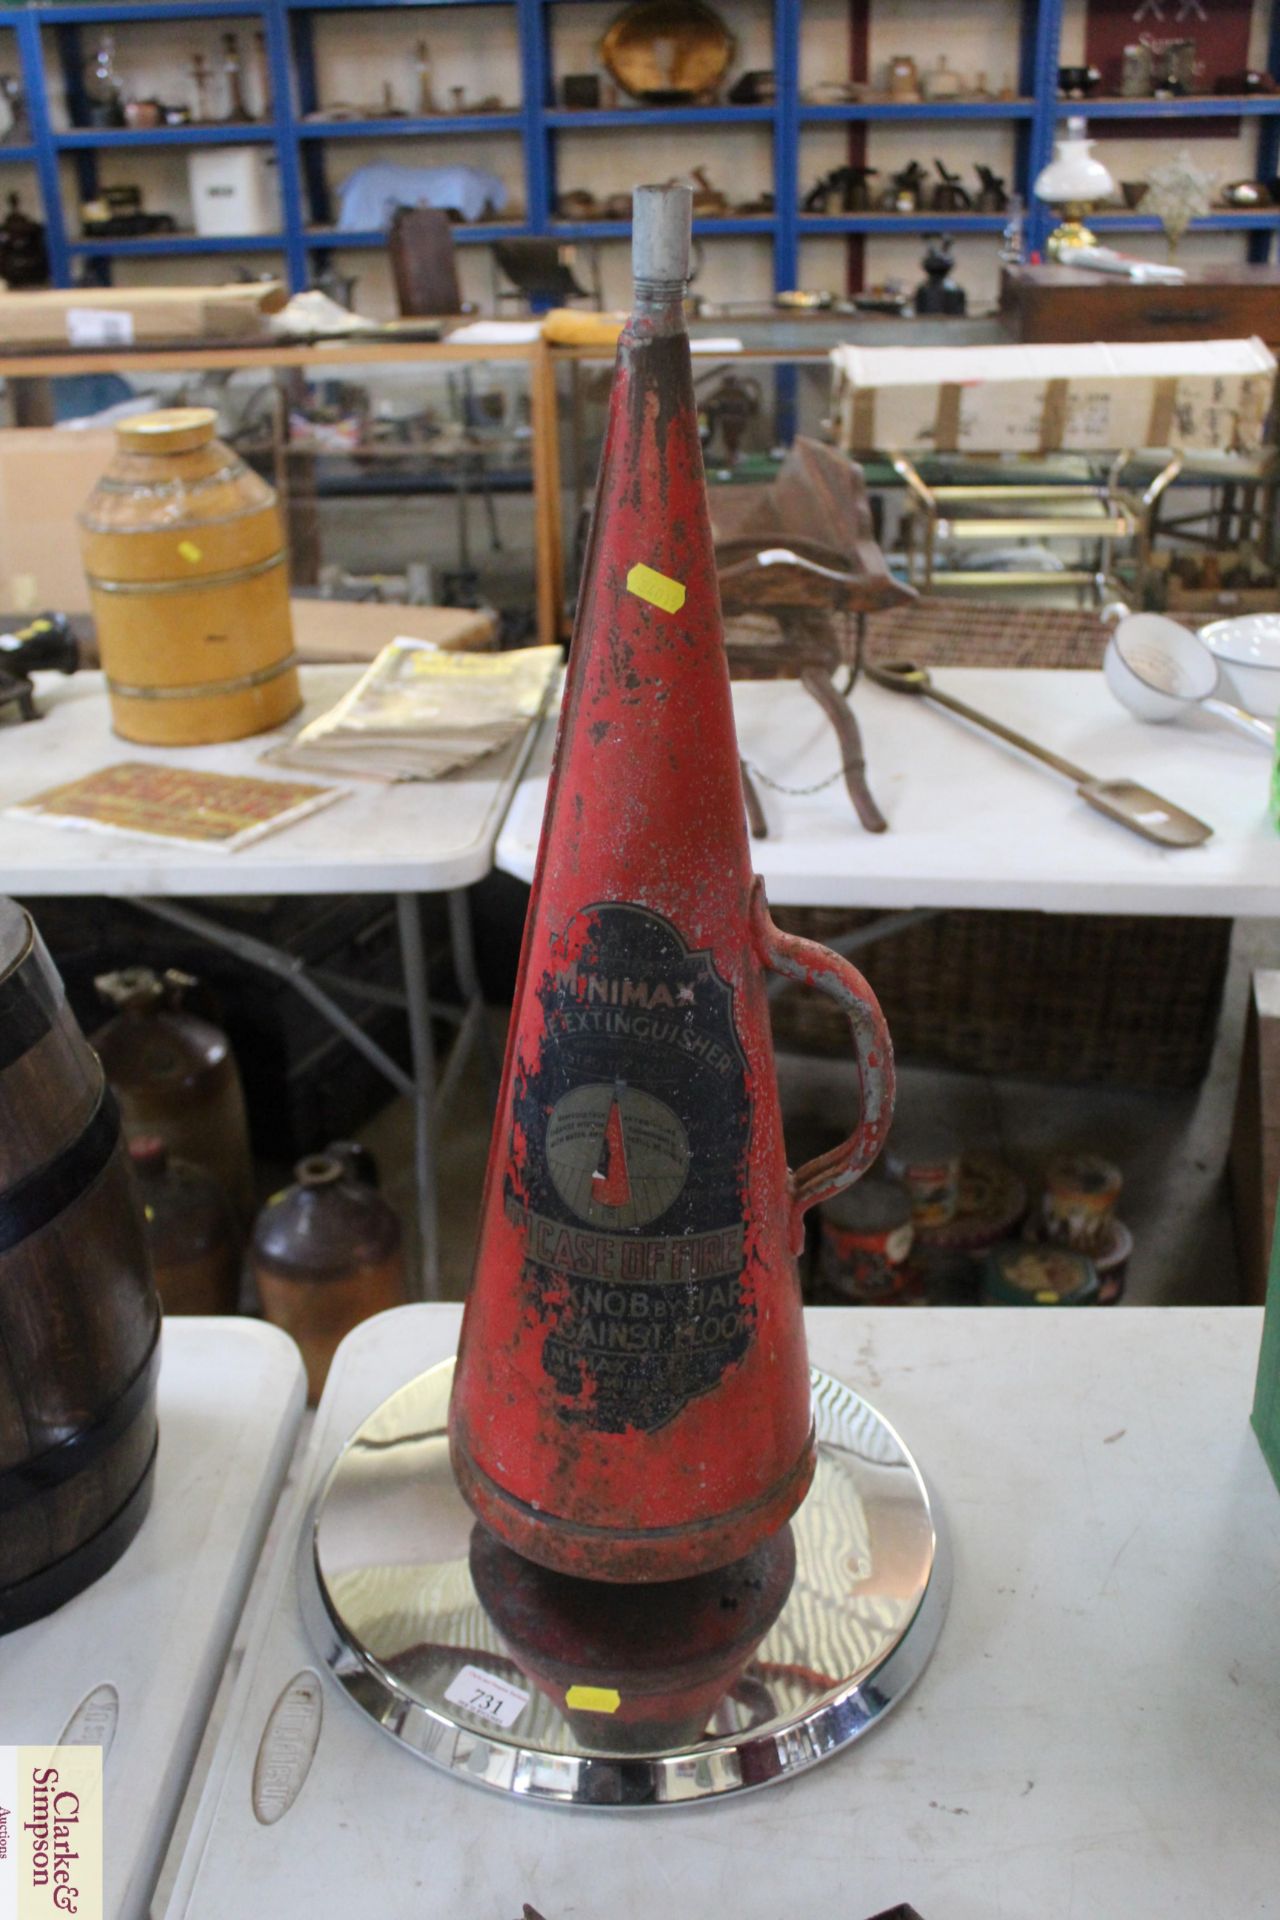 A fire extinguisher with base for conversion to a